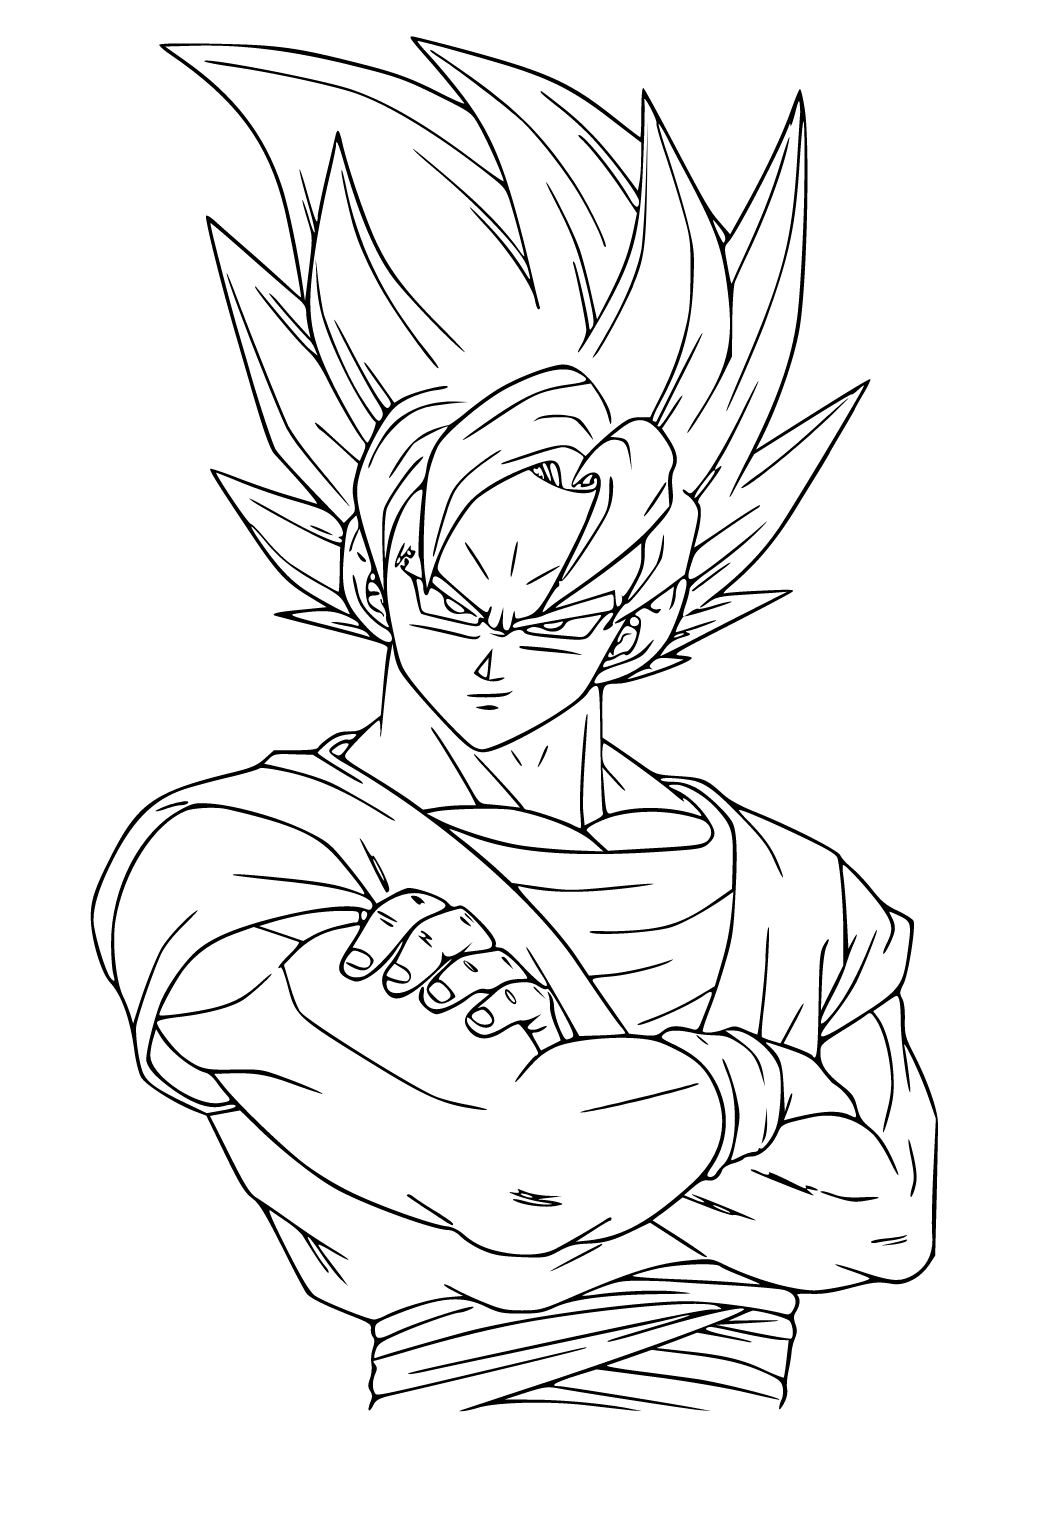 Free Printable Goku Strength Coloring Page, Sheet and Picture for Adults  and Kids (Girls and Boys) 